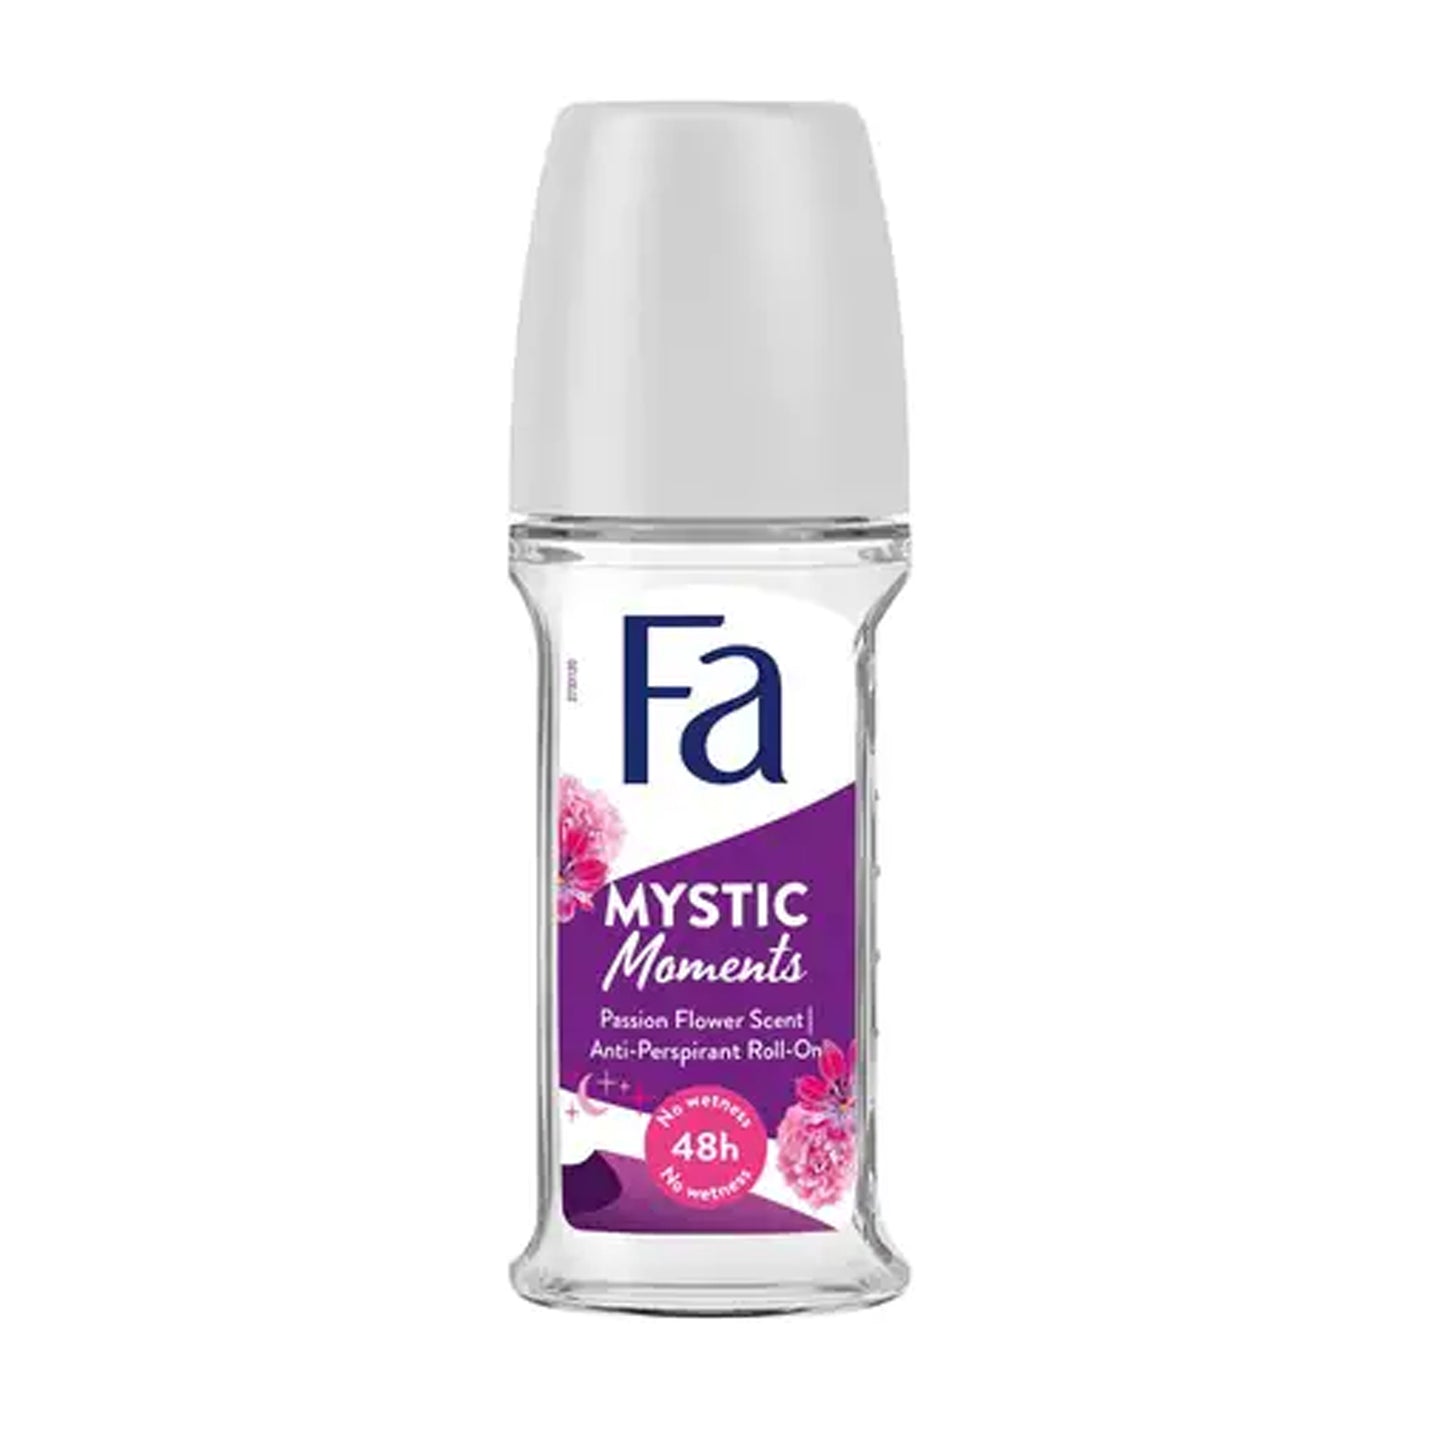 FA - MYSTIC MOMENTS PASSION FLOWER SCENT 48H ANTI-PERSPIRANT DEODORANT ROLL ON - 50ML